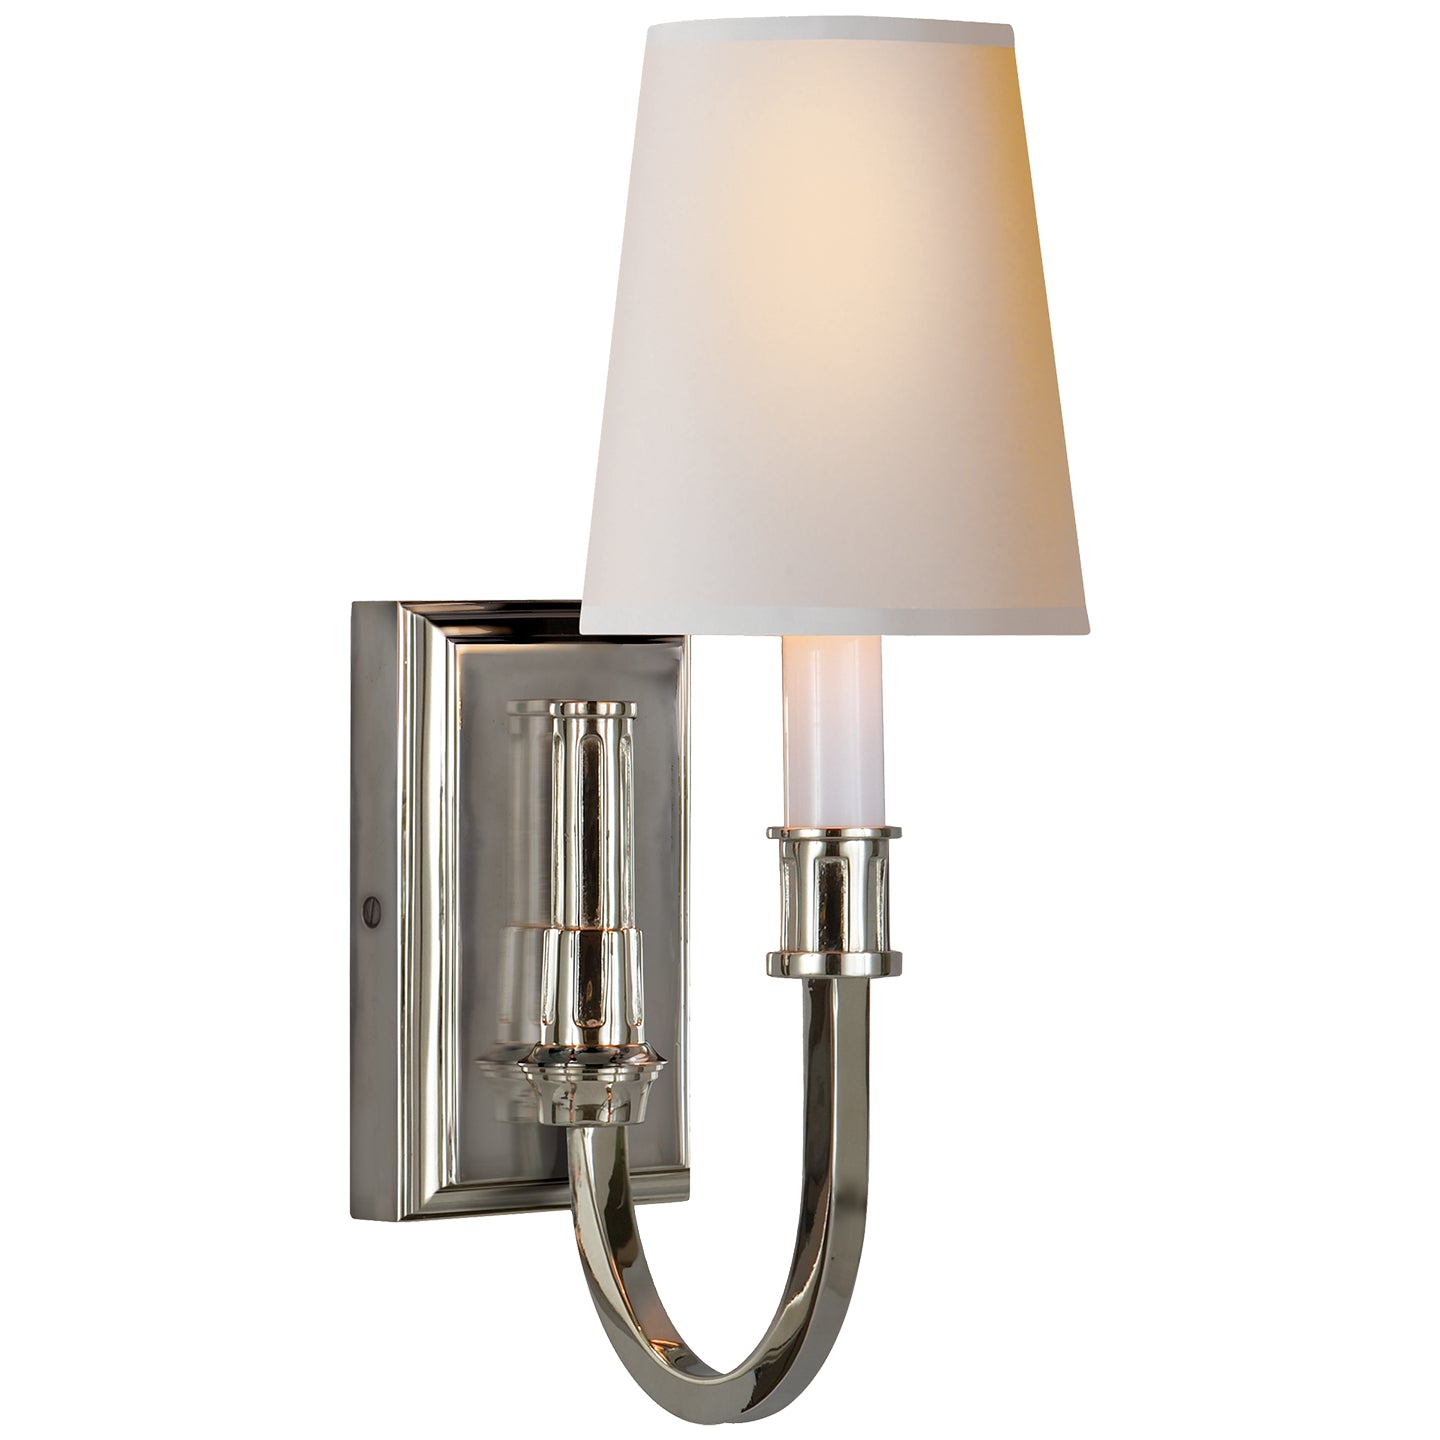 Visual Comfort Signature - TOB 2327PN-NP - One Light Wall Sconce - Modern Library - Polished Nickel